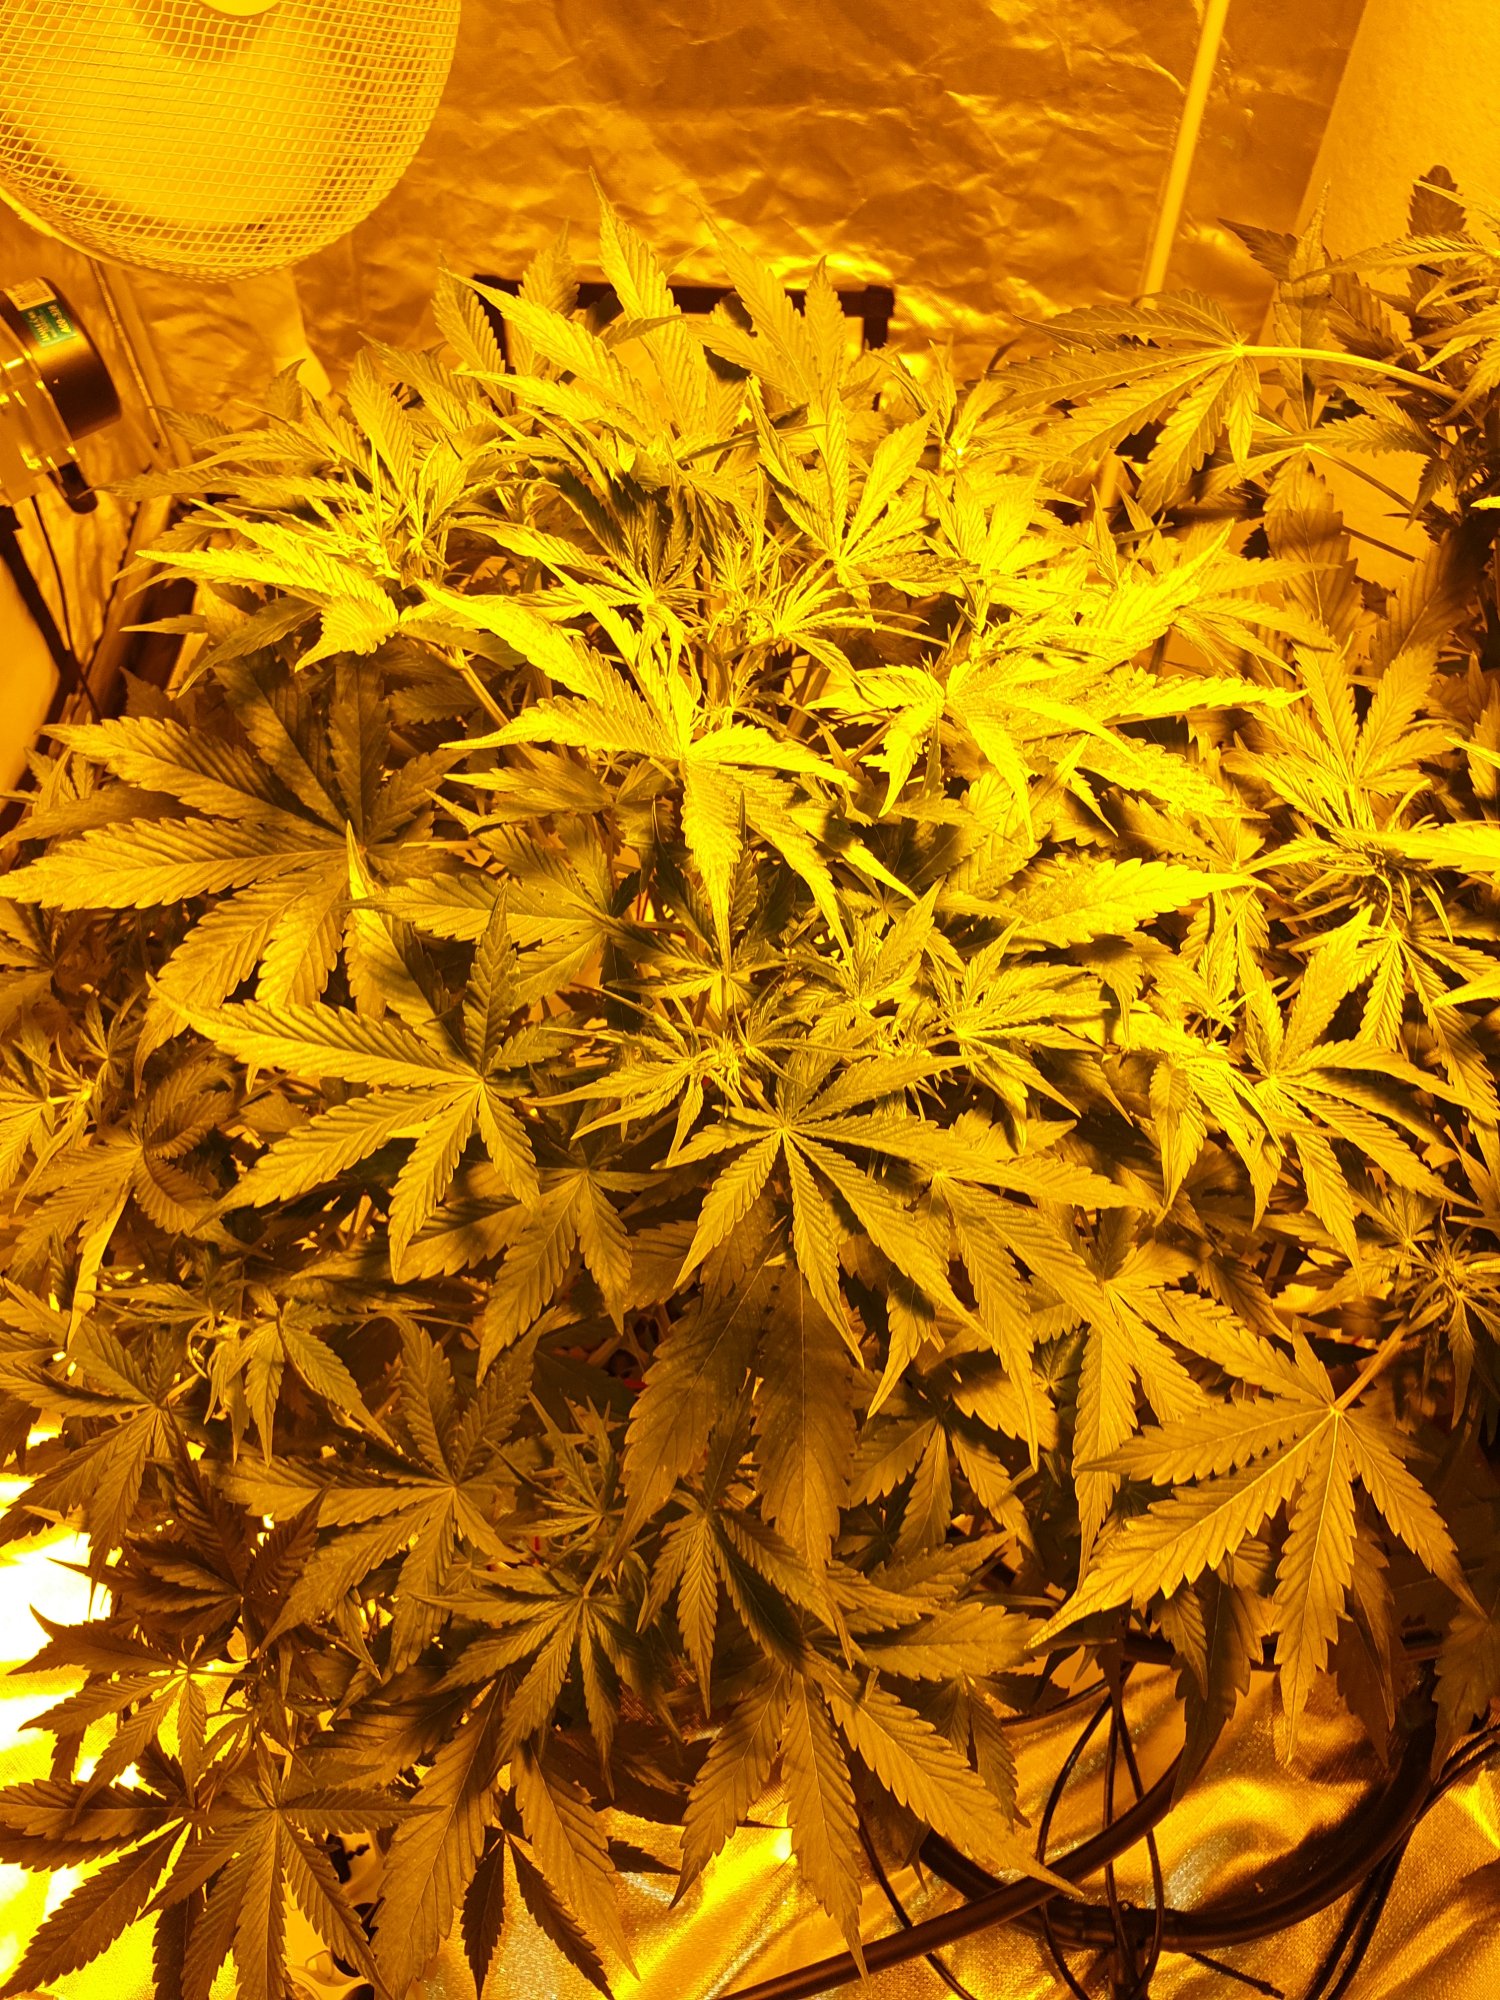 Wk 1 2 flower whats my deficiency 12